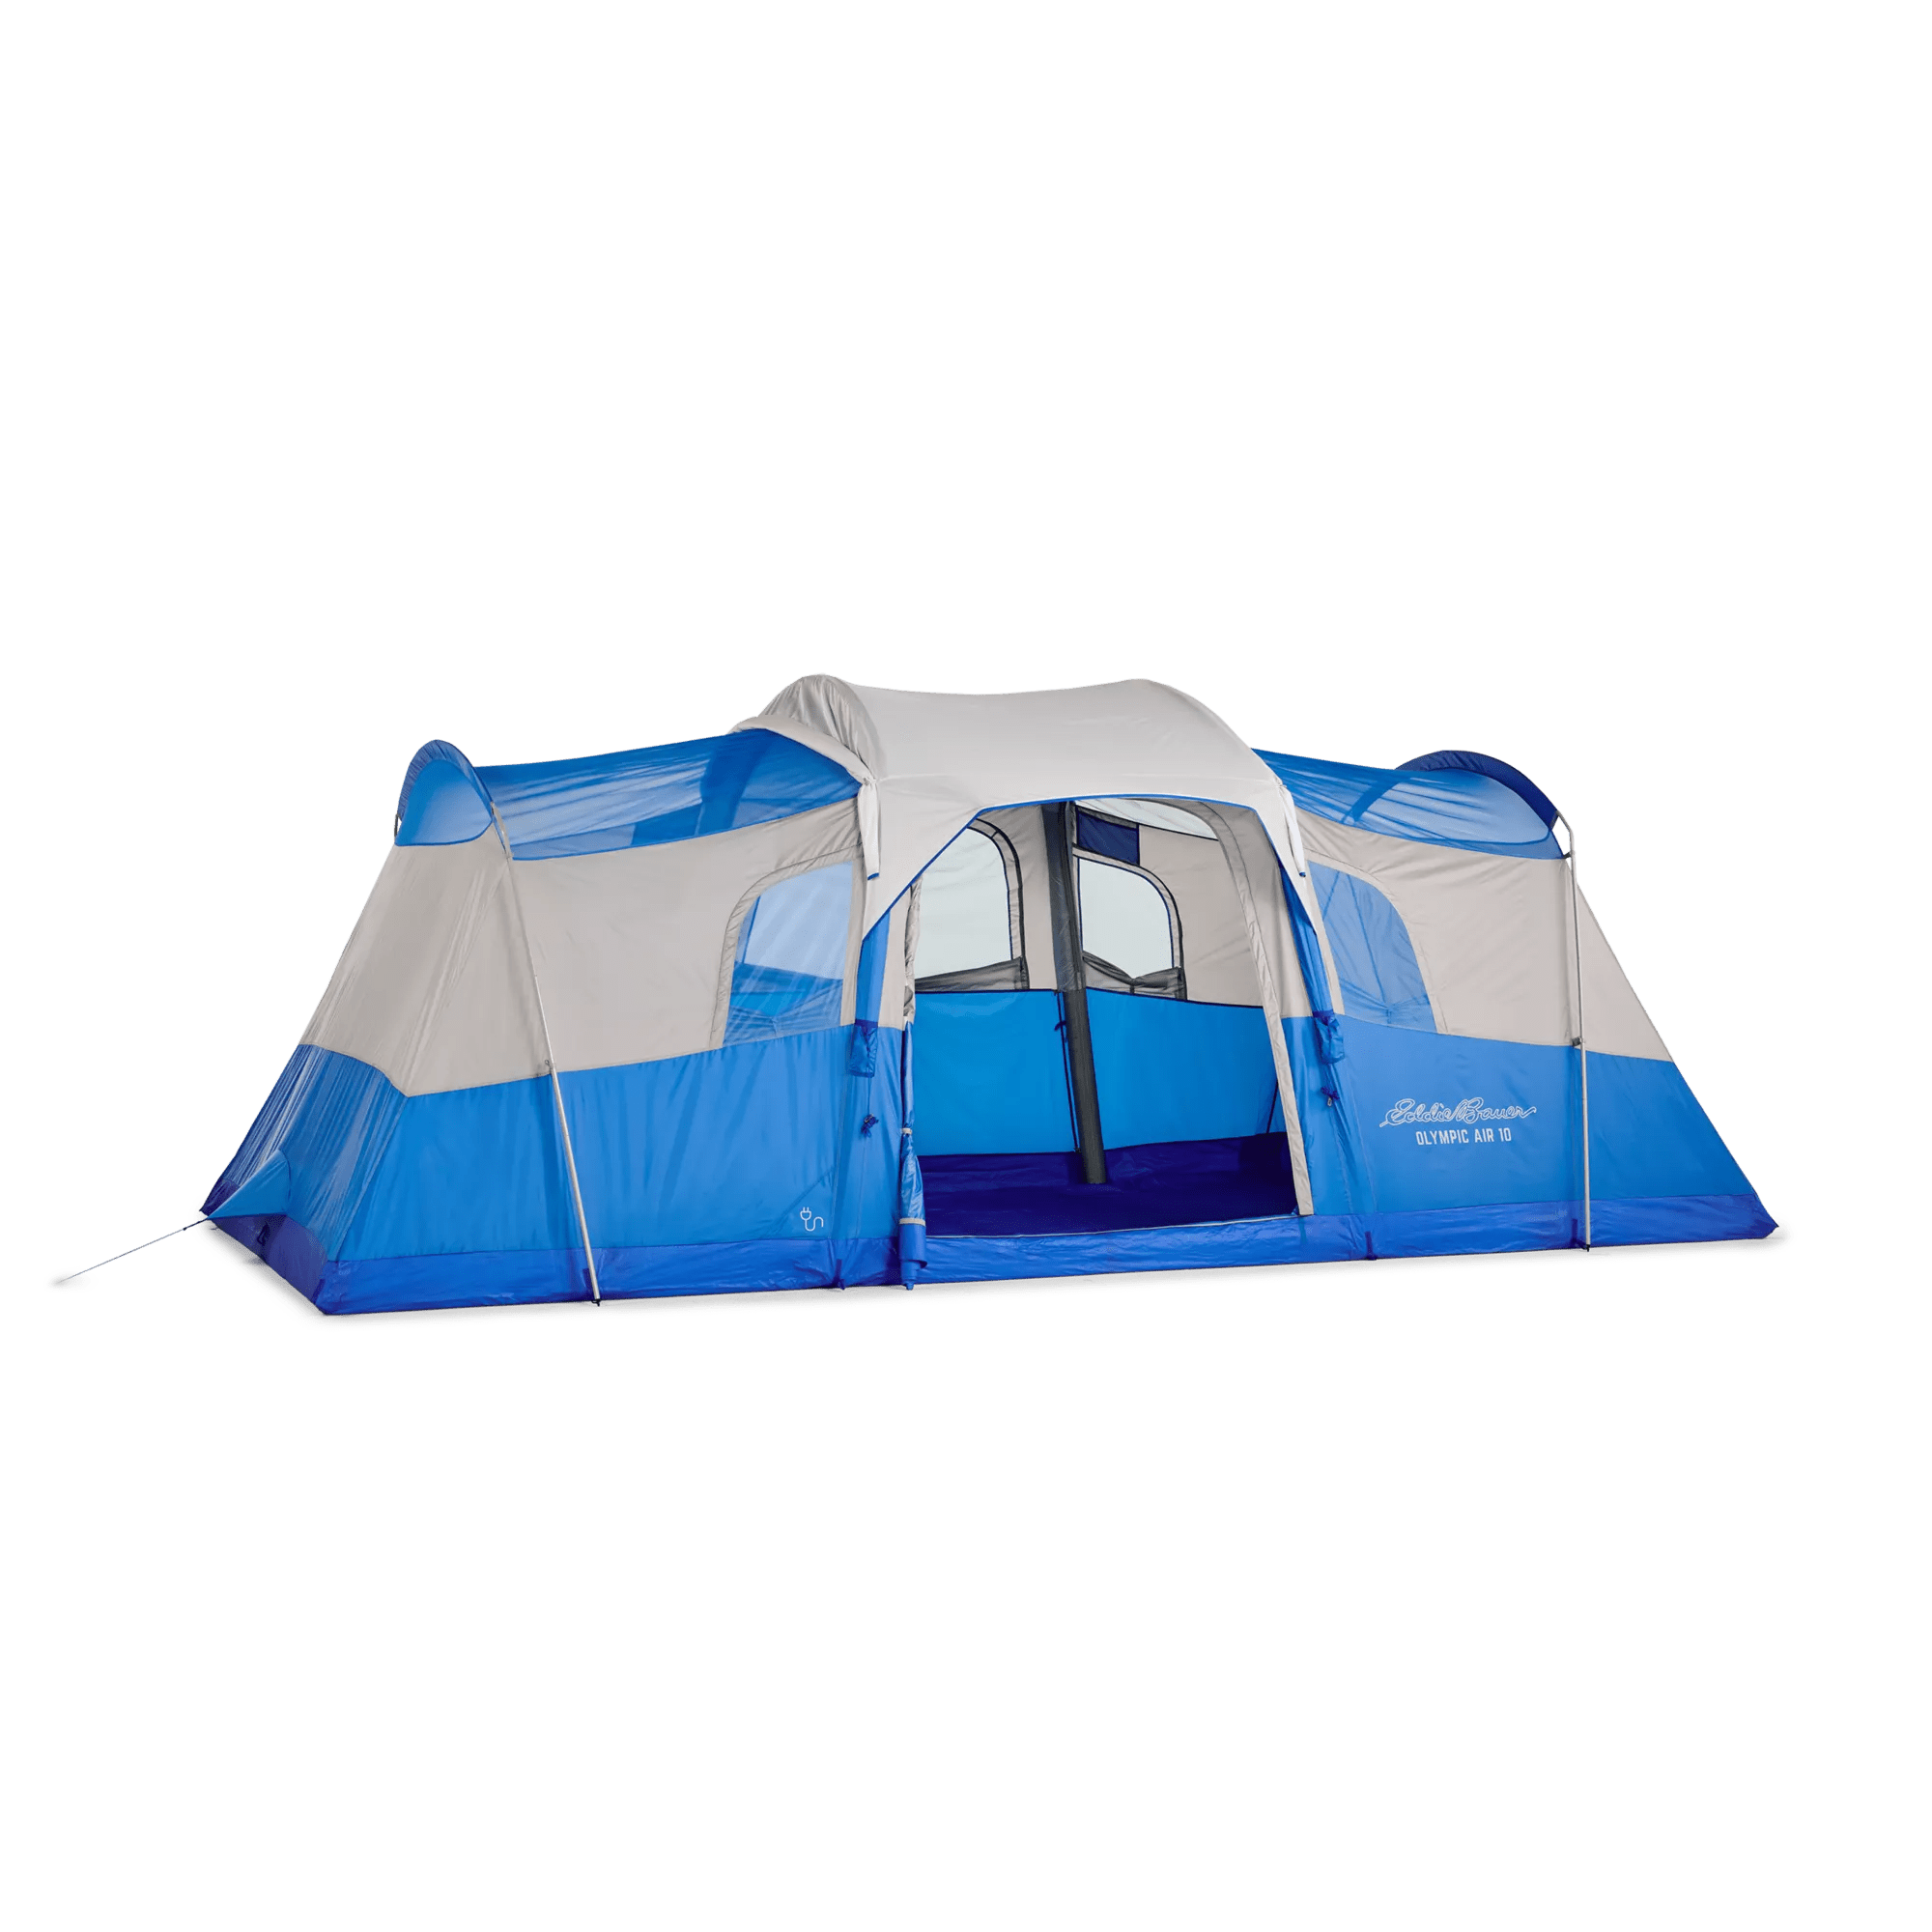 Olympic Air 10 Tent